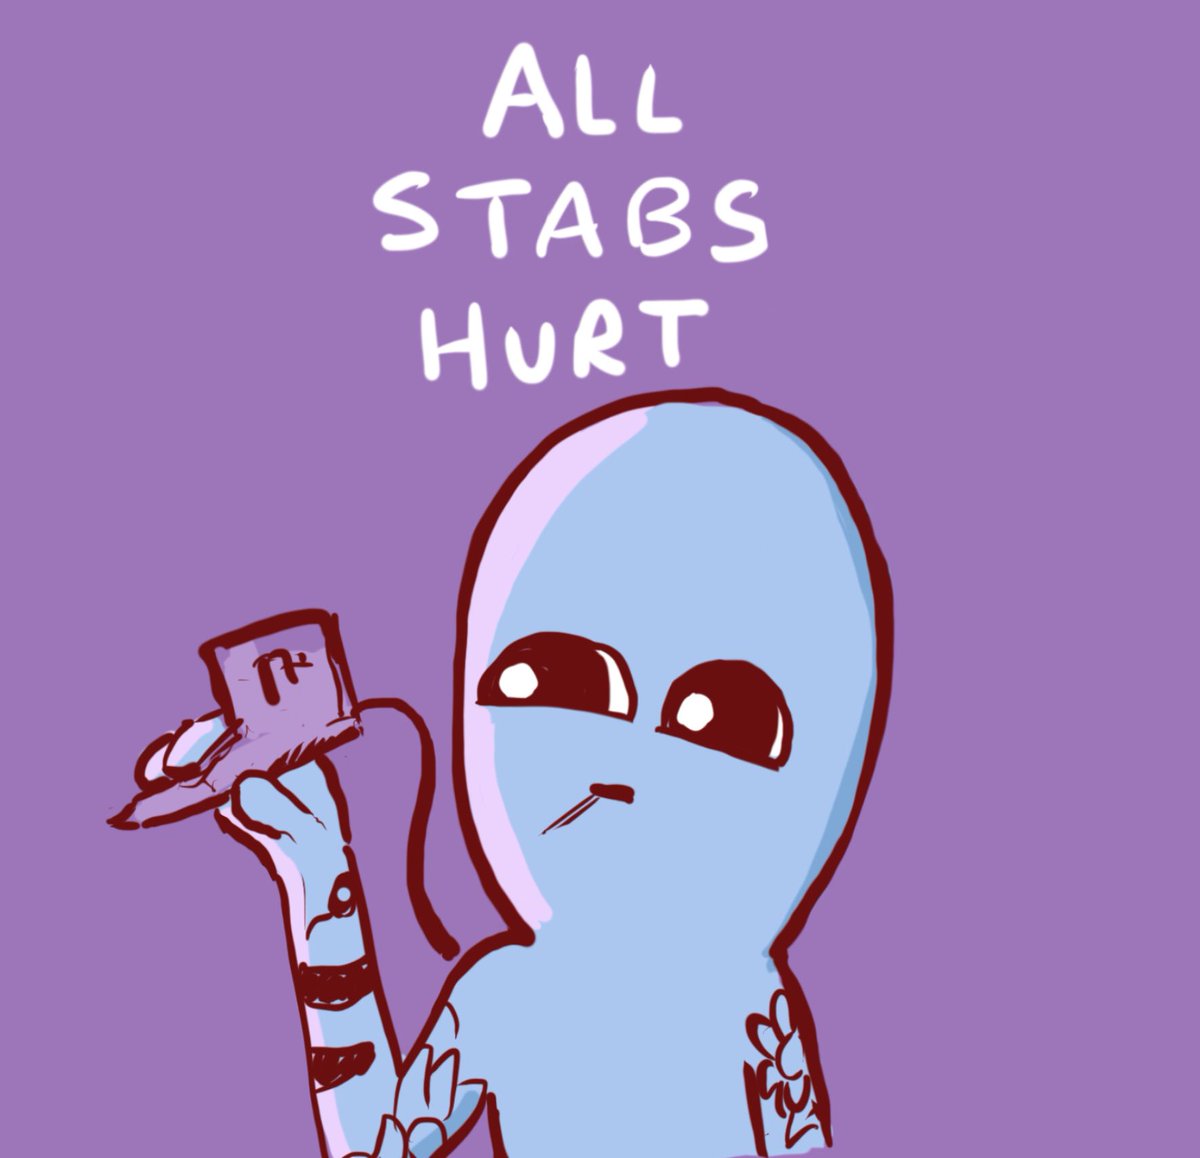 All stabs hurt.